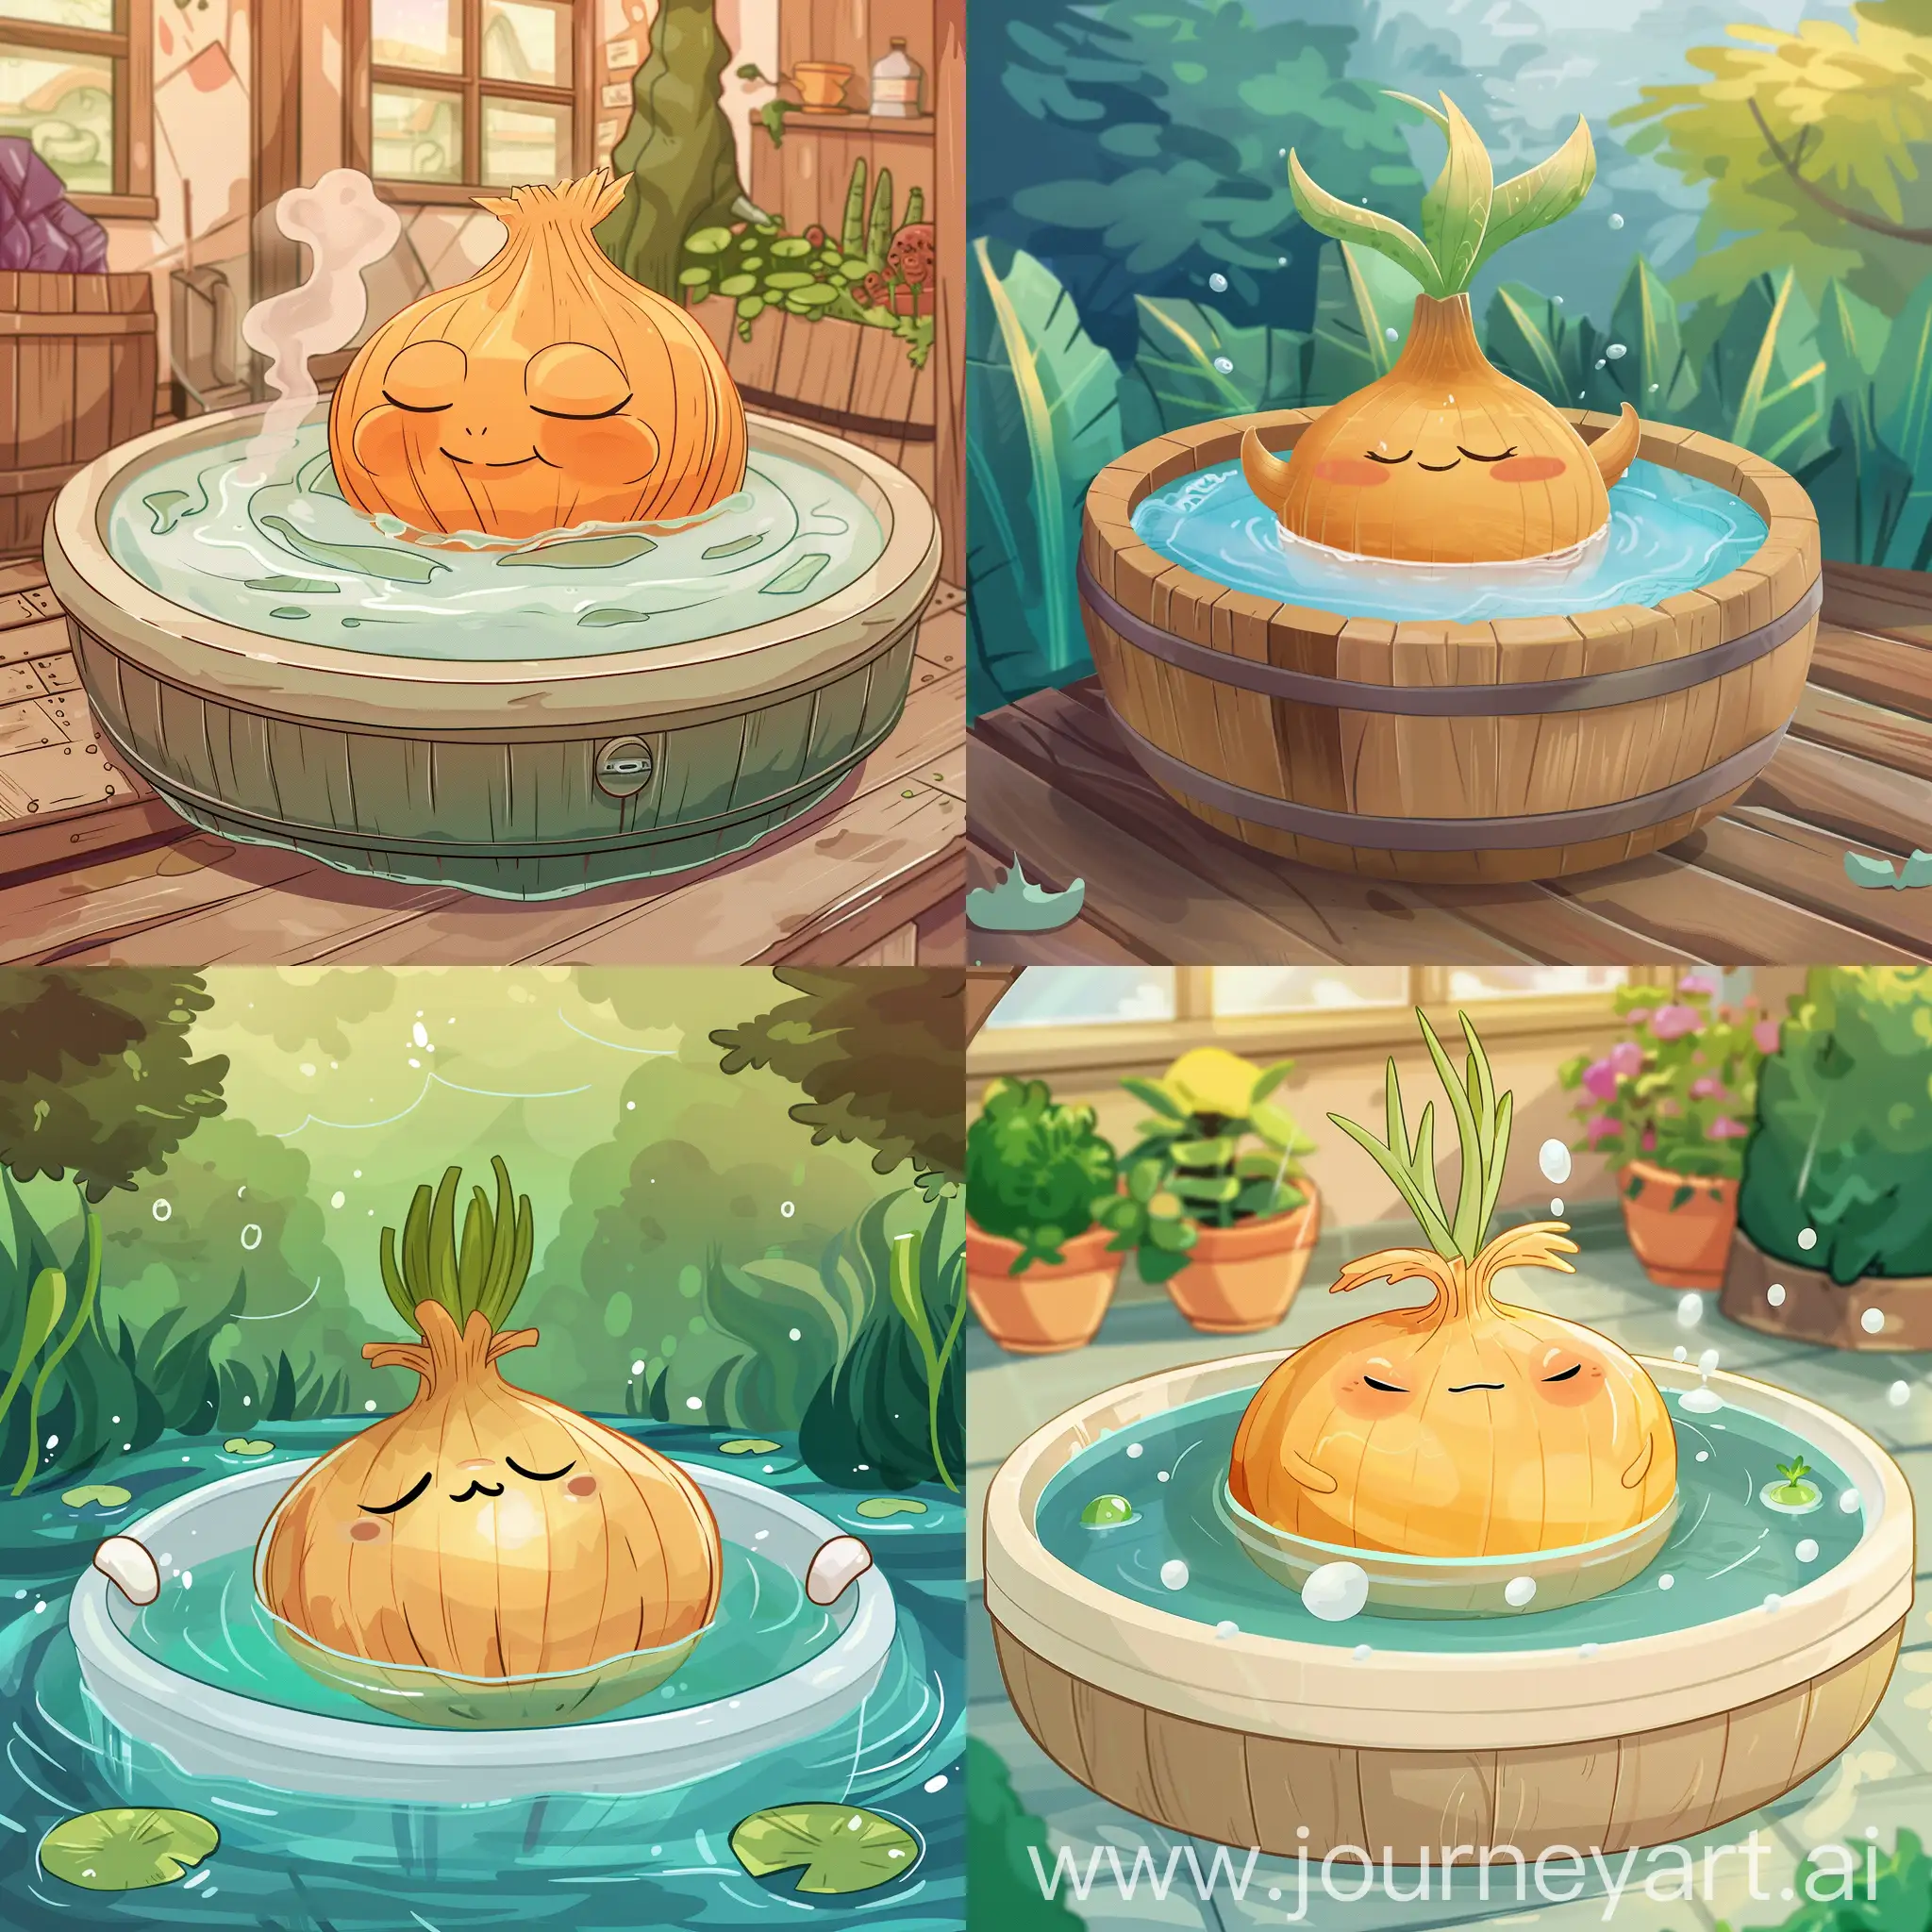 Chilled-Onion-Enjoying-a-Soothing-Hot-Tub-Soak-in-a-Whimsical-Wonderland